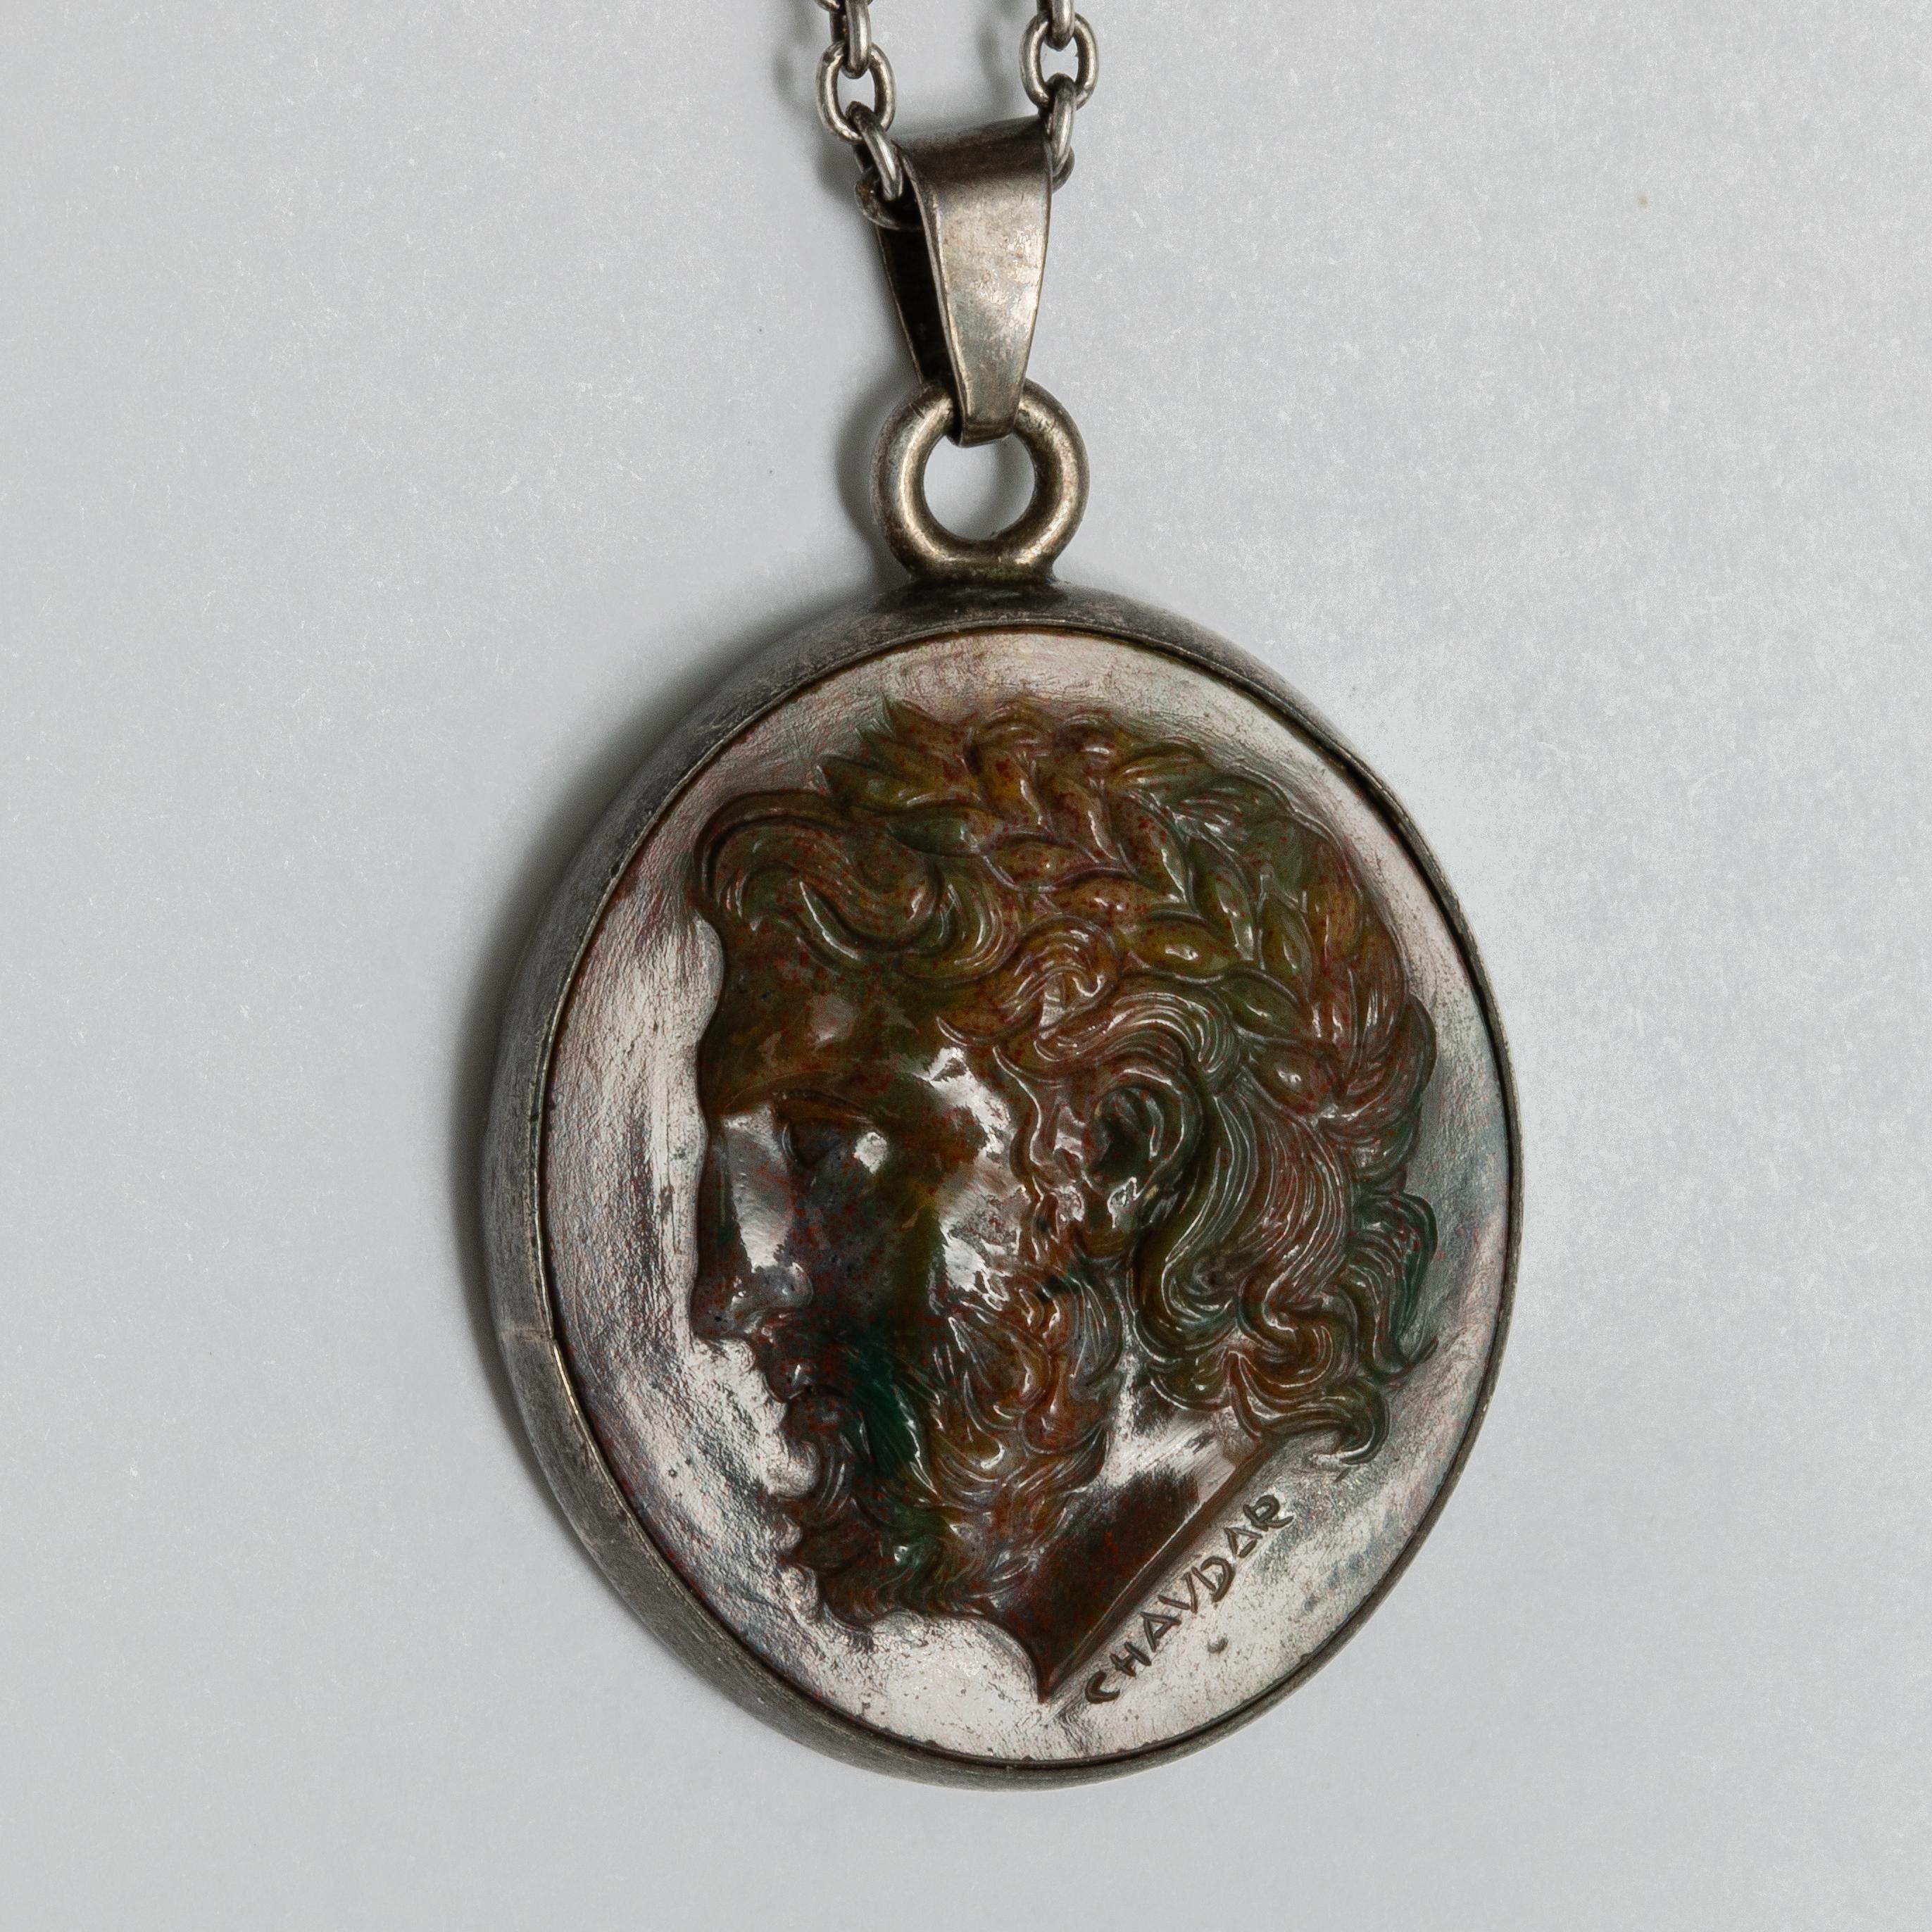 This exquisite intaglio is masterfully engraved onto bloodstone and features a depiction Zeus. The stone is set in a 925 sterling silver pendant.

Production time for this piece is 4-6 weeks.

A 16